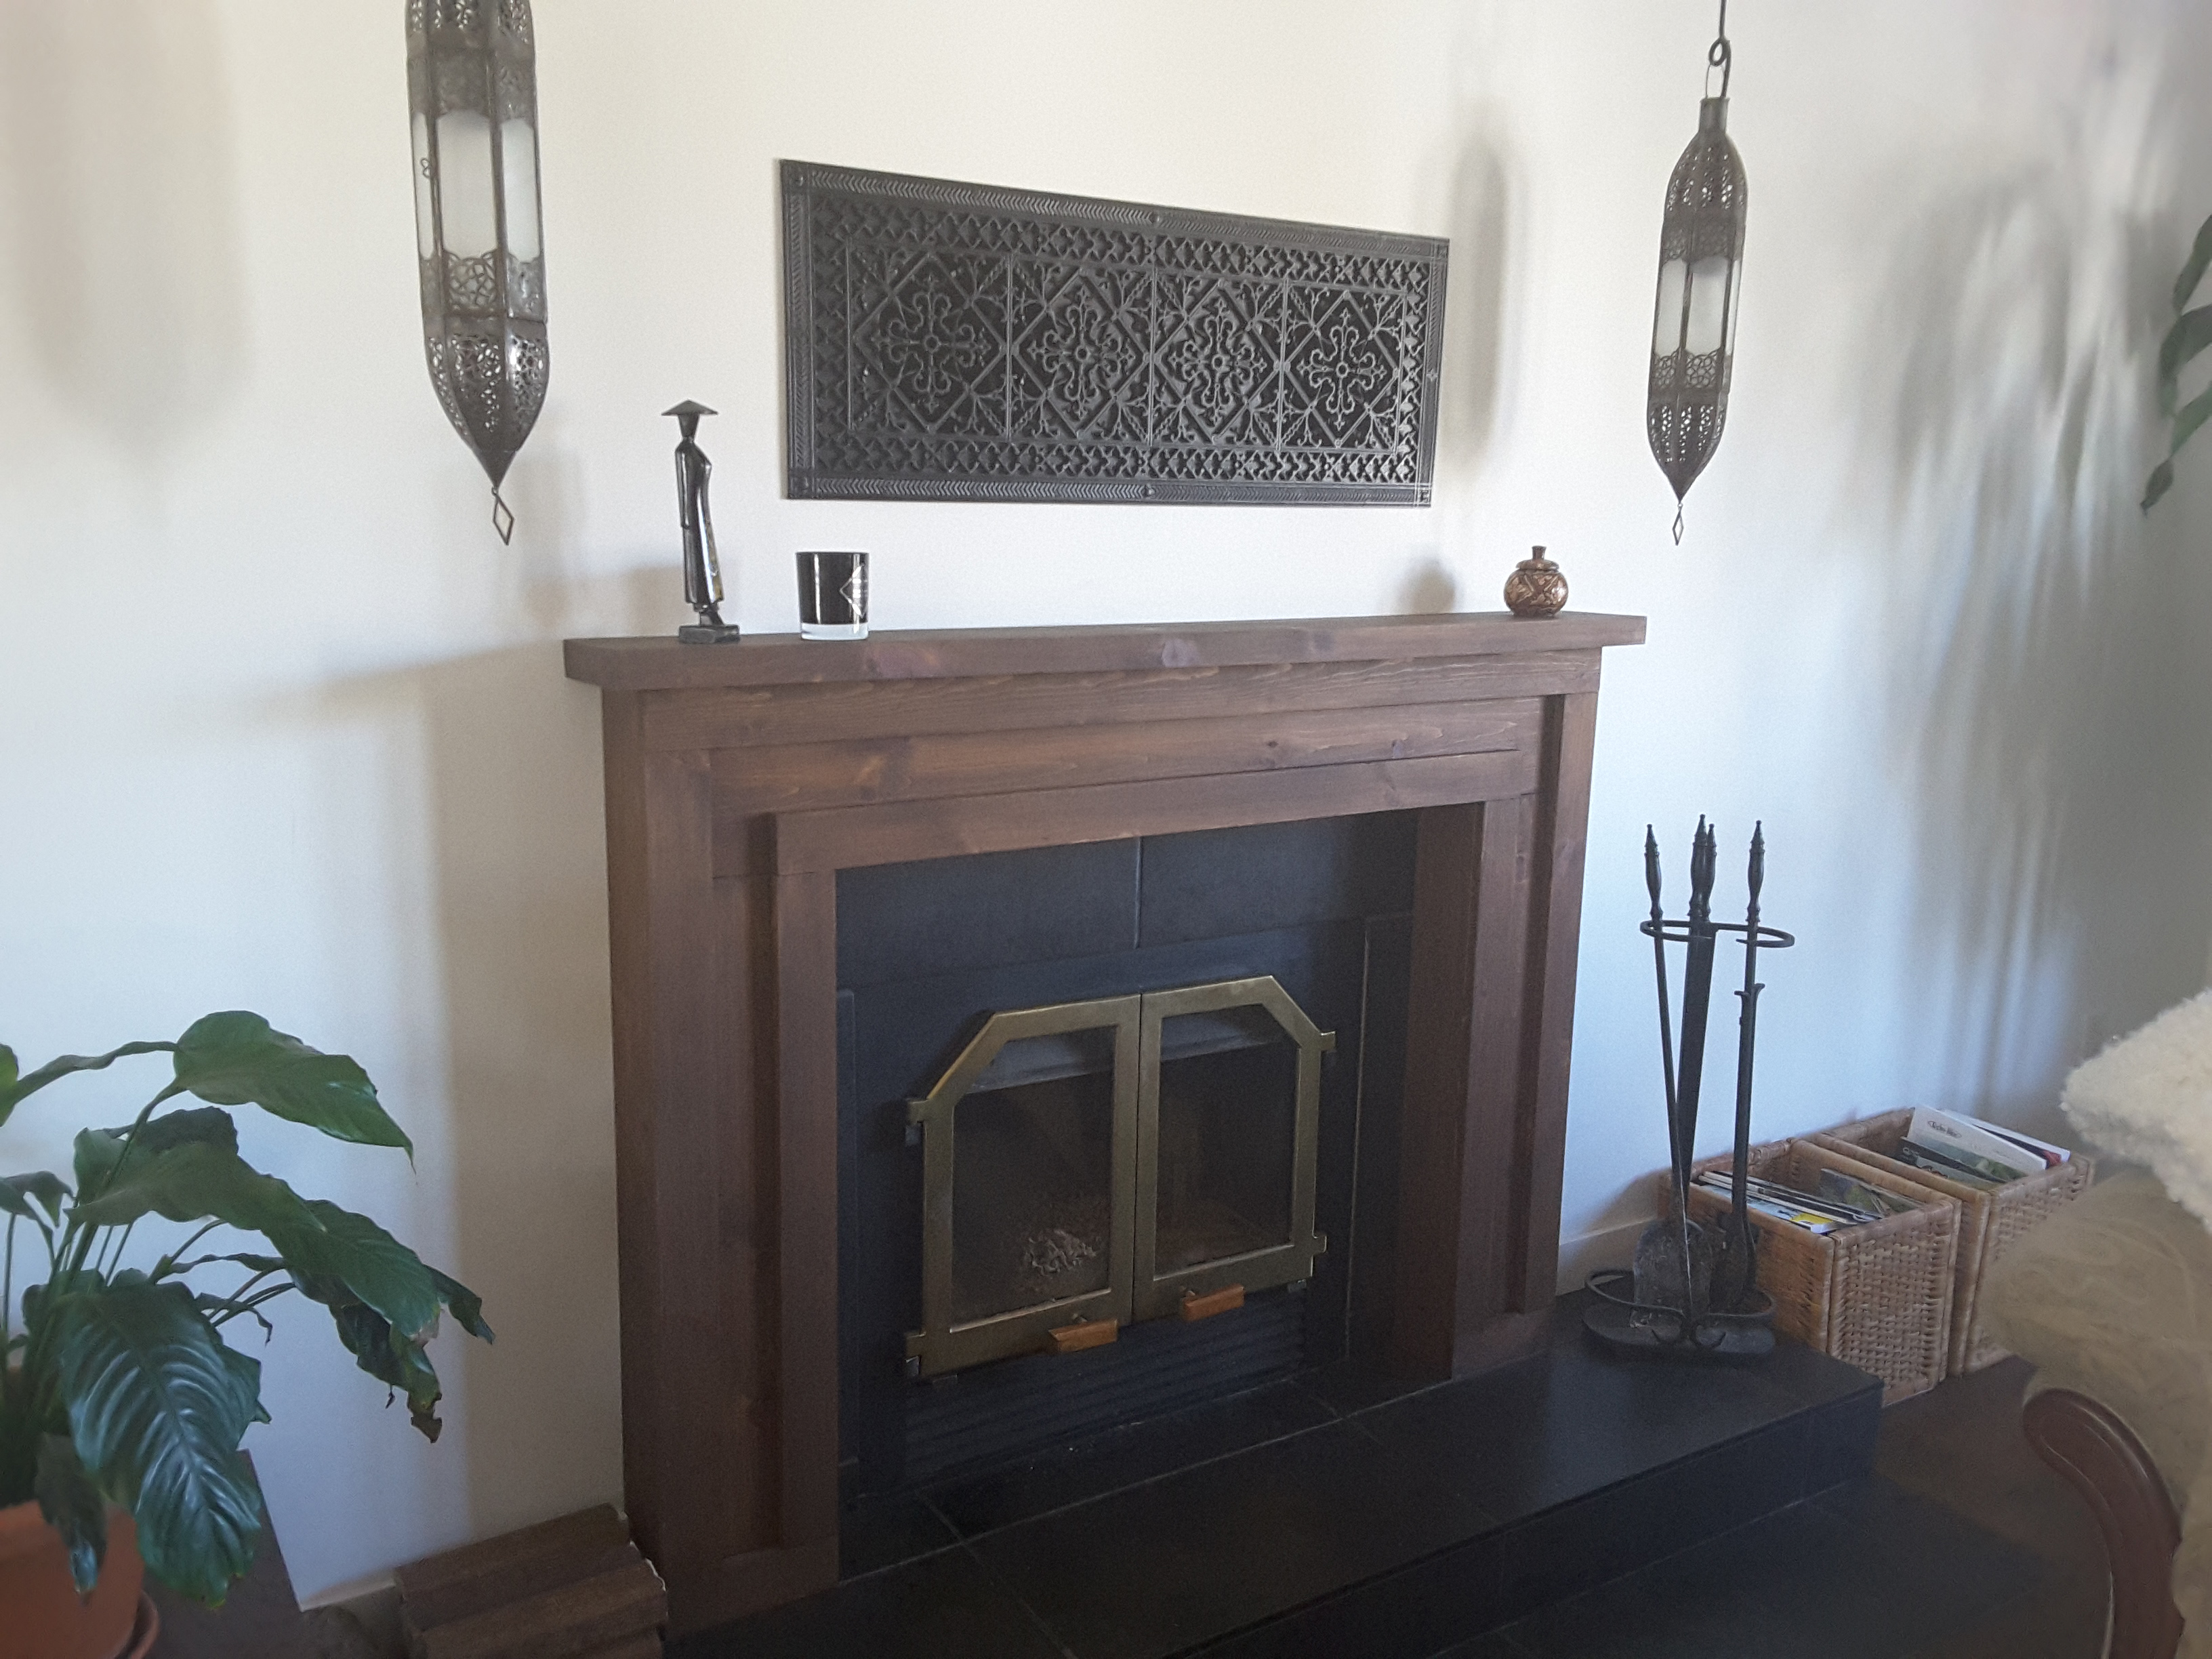 Fireplace heatolator with arts and crafts decorative grille